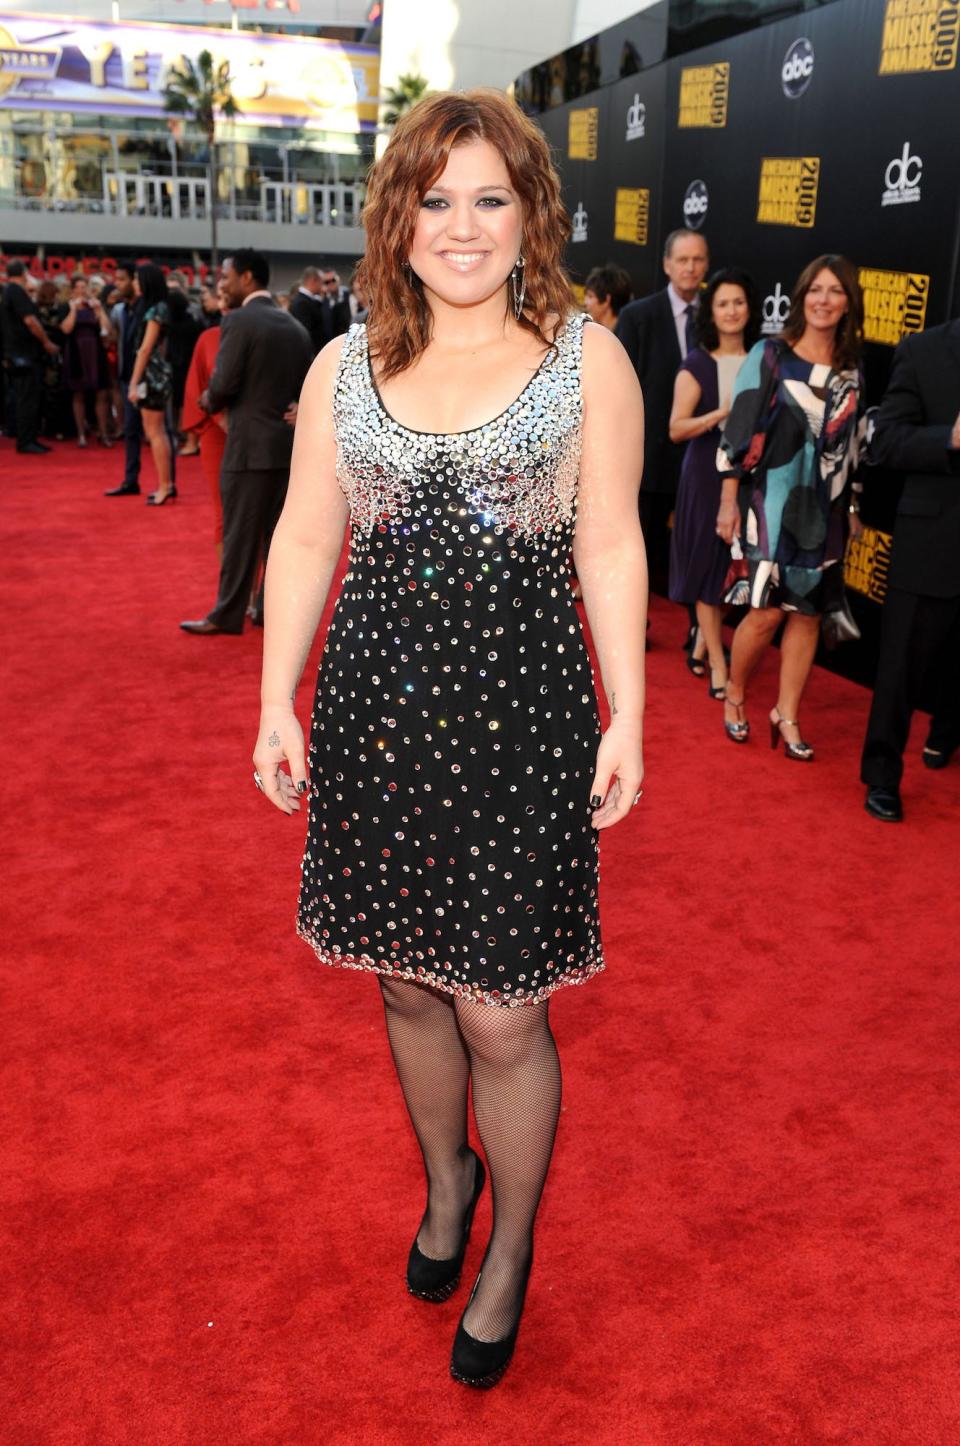 14 photos that show how Kelly Clarkson's style has changed since her ...